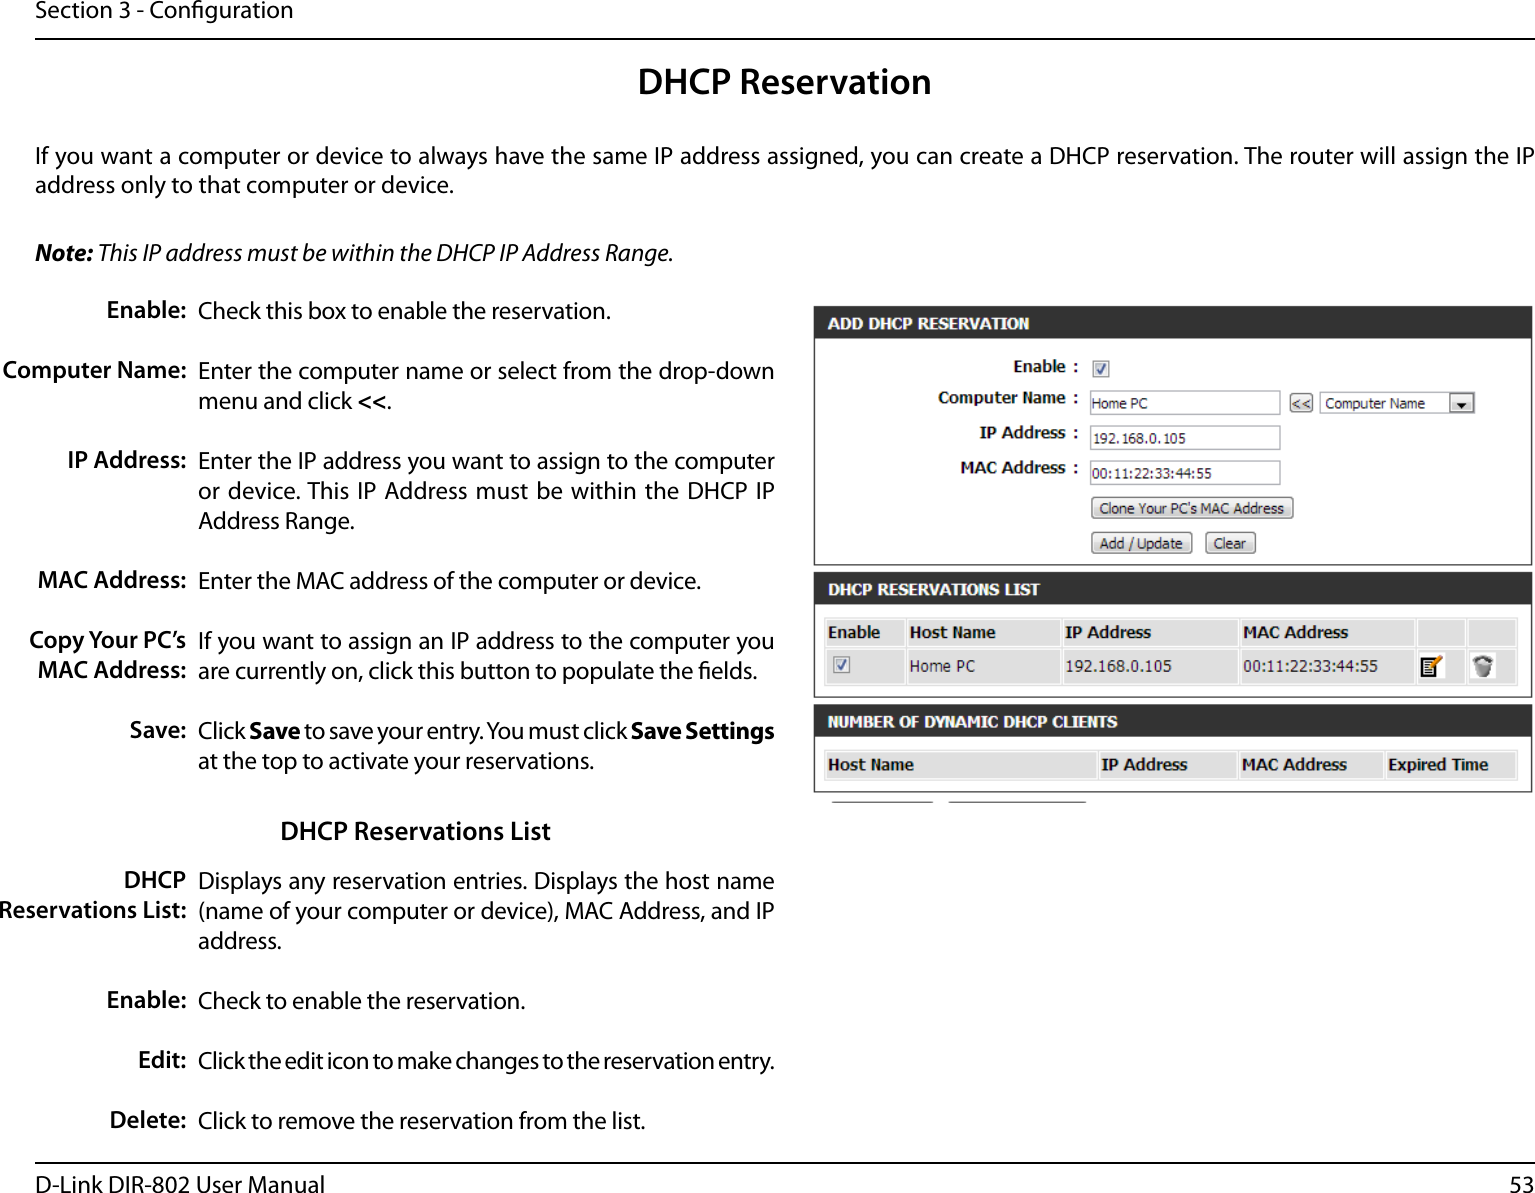 53D-Link DIR-802 User ManualSection 3 - CongurationDHCP ReservationIf you want a computer or device to always have the same IP address assigned, you can create a DHCP reservation. The router will assign the IP address only to that computer or device. Note: This IP address must be within the DHCP IP Address Range.Check this box to enable the reservation.Enter the computer name or select from the drop-down menu and click &lt;&lt;.Enter the IP address you want to assign to the computer or device. This IP Address must  be within the DHCP IP Address Range.Enter the MAC address of the computer or device.If you want to assign an IP address to the computer you are currently on, click this button to populate the elds. Click Save to save your entry. You must click Save Settings at the top to activate your reservations. Displays any reservation entries. Displays the host name (name of your computer or device), MAC Address, and IP address.Check to enable the reservation.Click the edit icon to make changes to the reservation entry.Click to remove the reservation from the list.Enable:Computer Name:IP Address:MAC Address:Copy Your PC’s MAC Address:Save:DHCP Reservations List:Enable:Edit:Delete:DHCP Reservations List